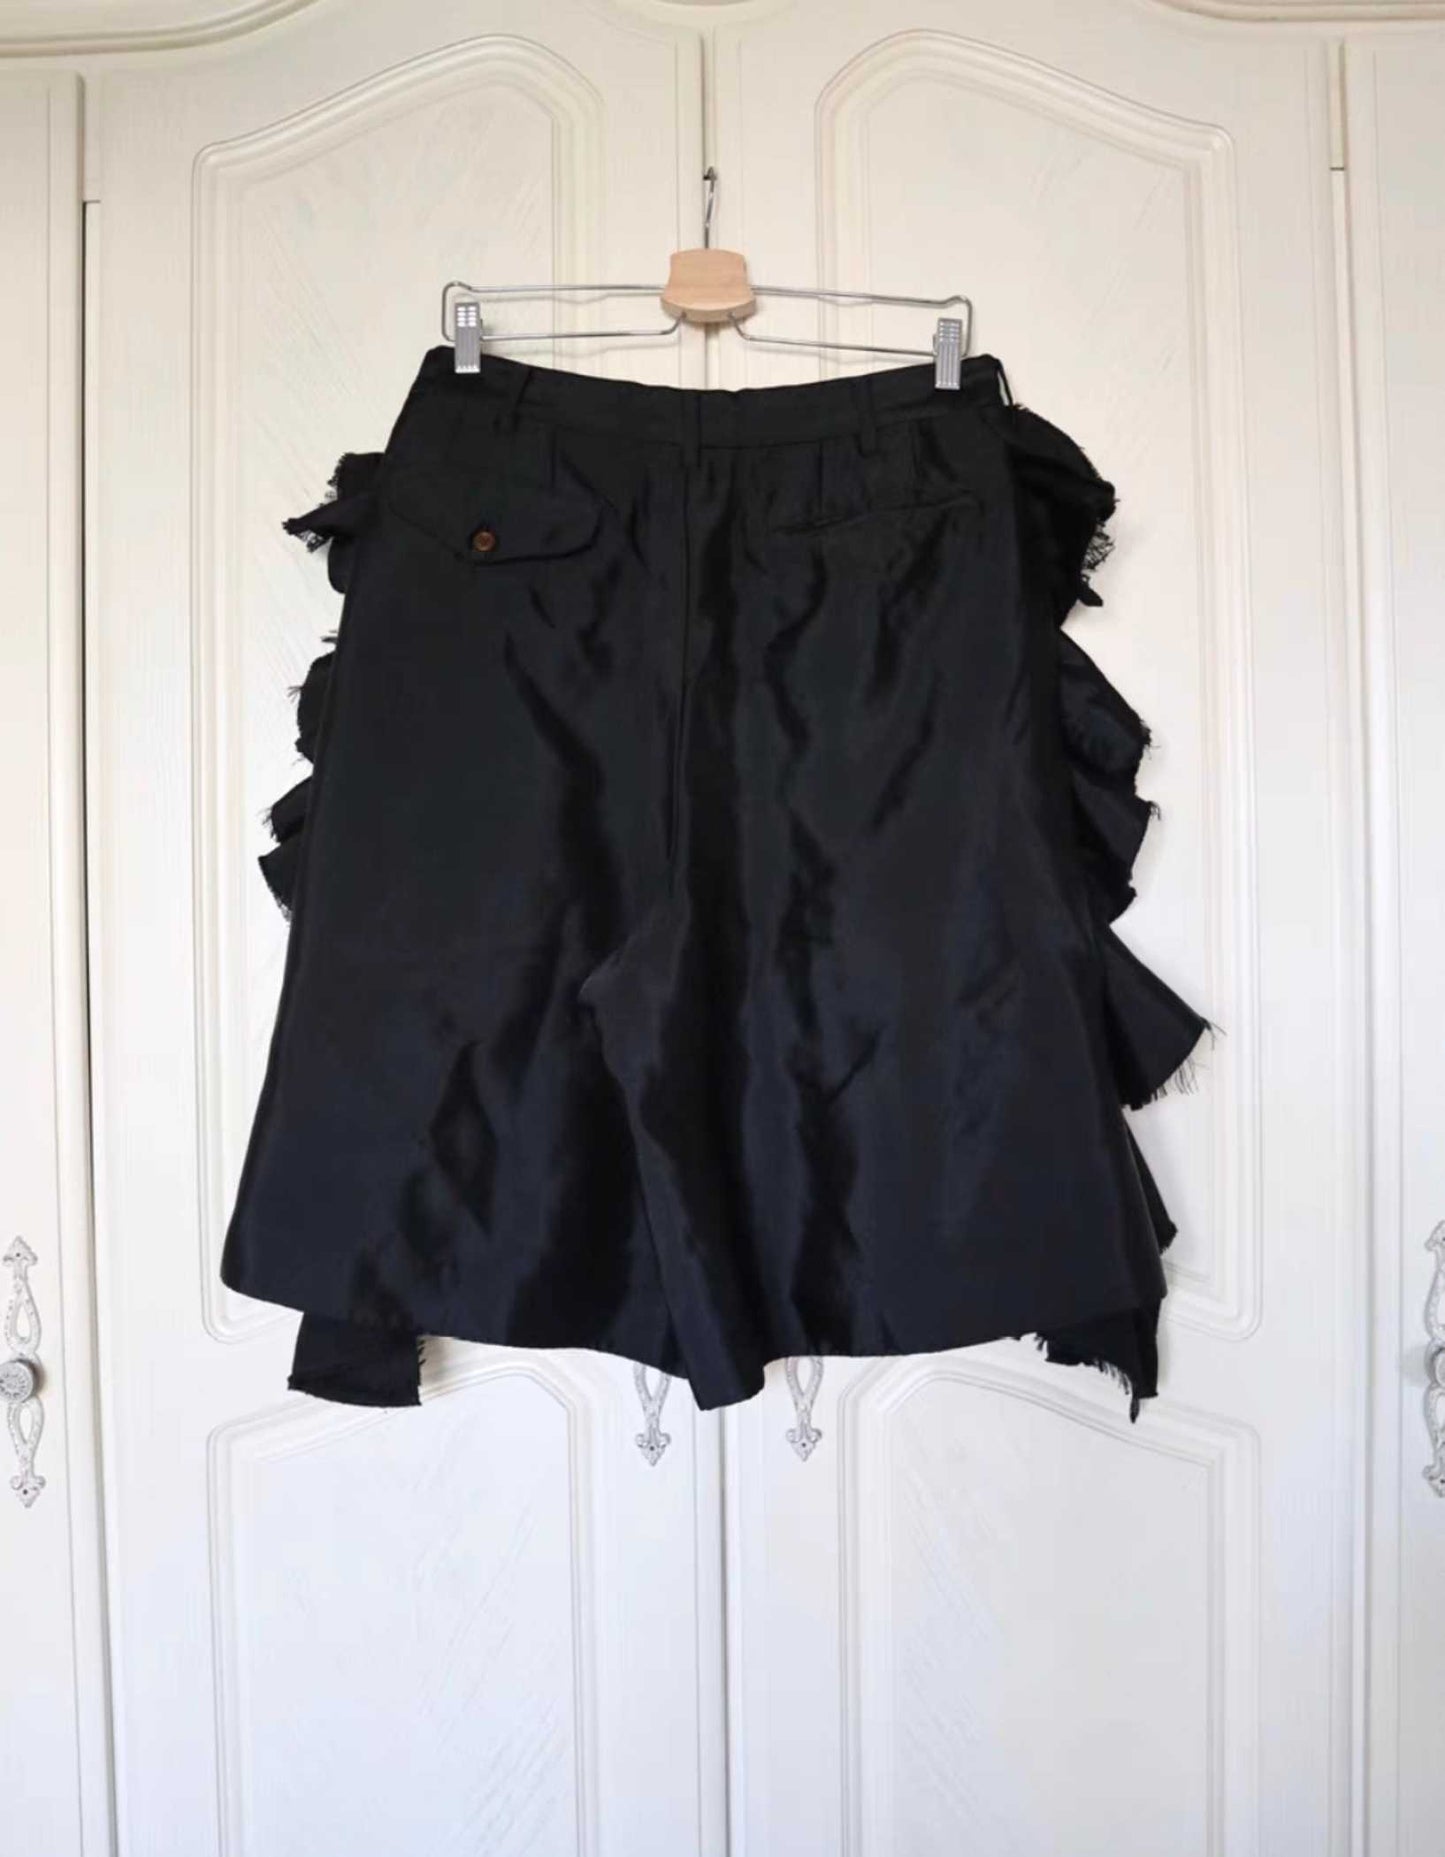 CDG Homme Plus 20SS "Orlando" Cropped Shorts